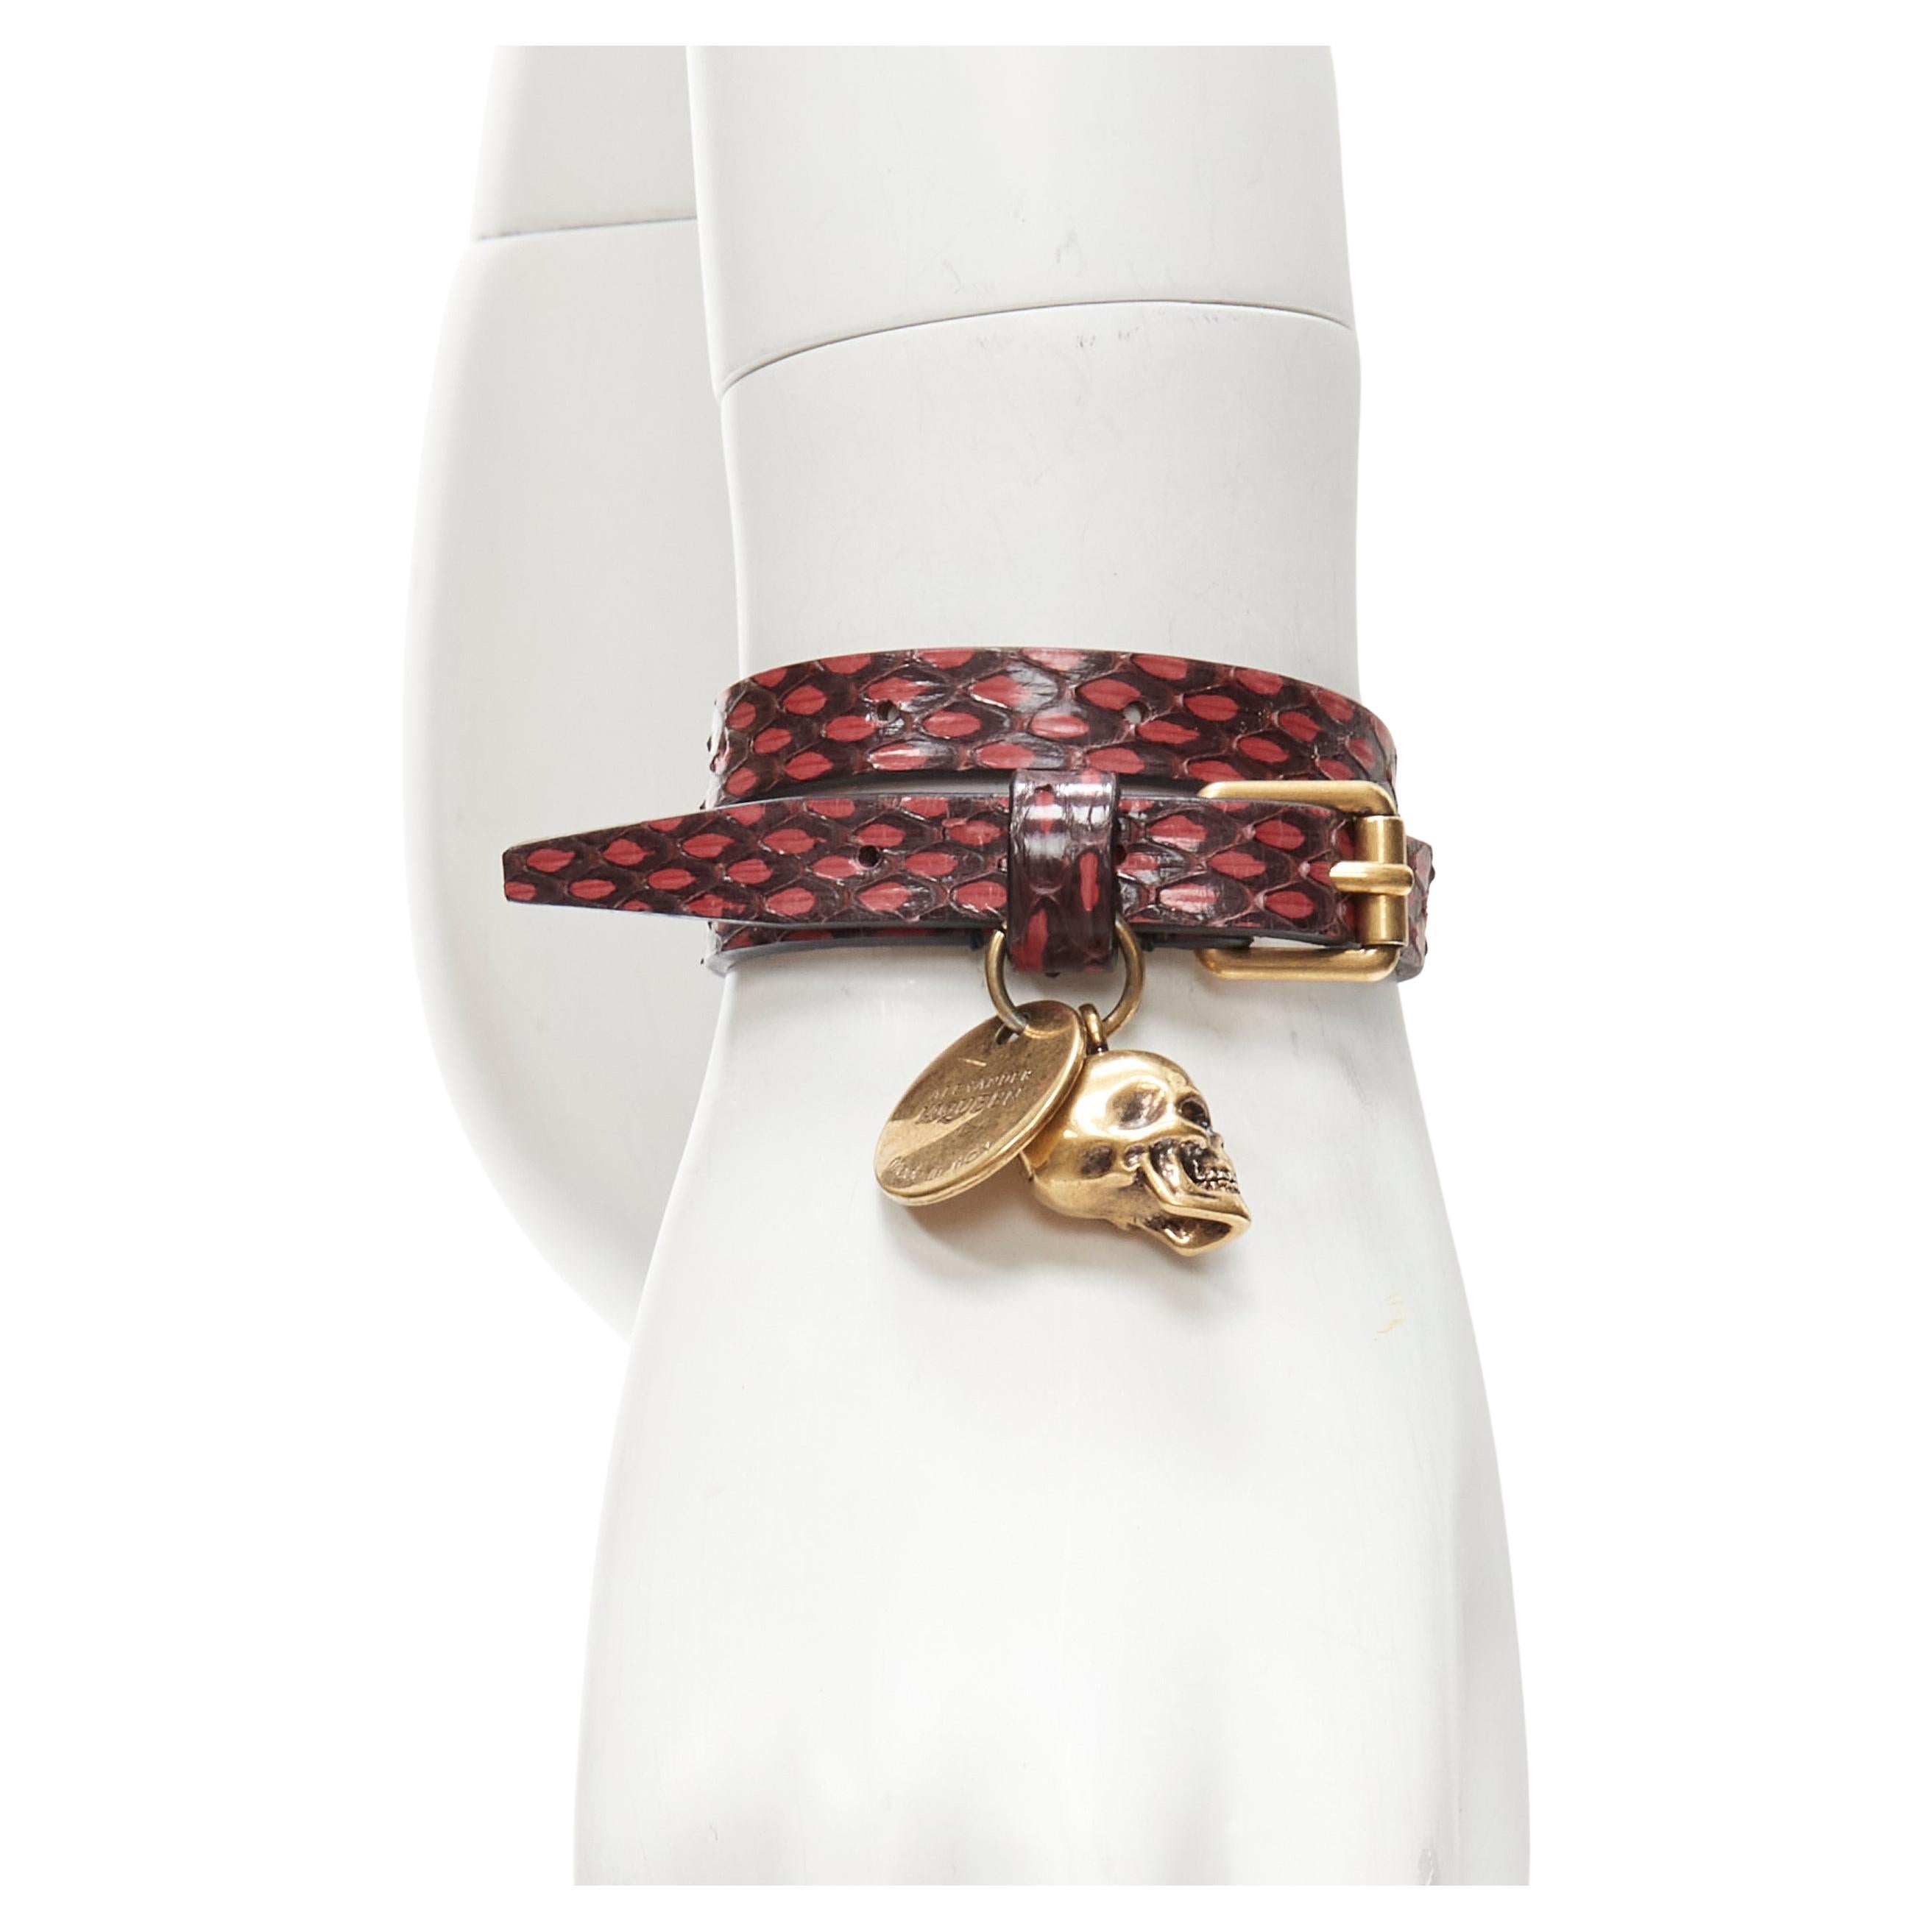 ALEXANDER MCQUEEN red black scaled leather skull charm double wrap bracelet cuff